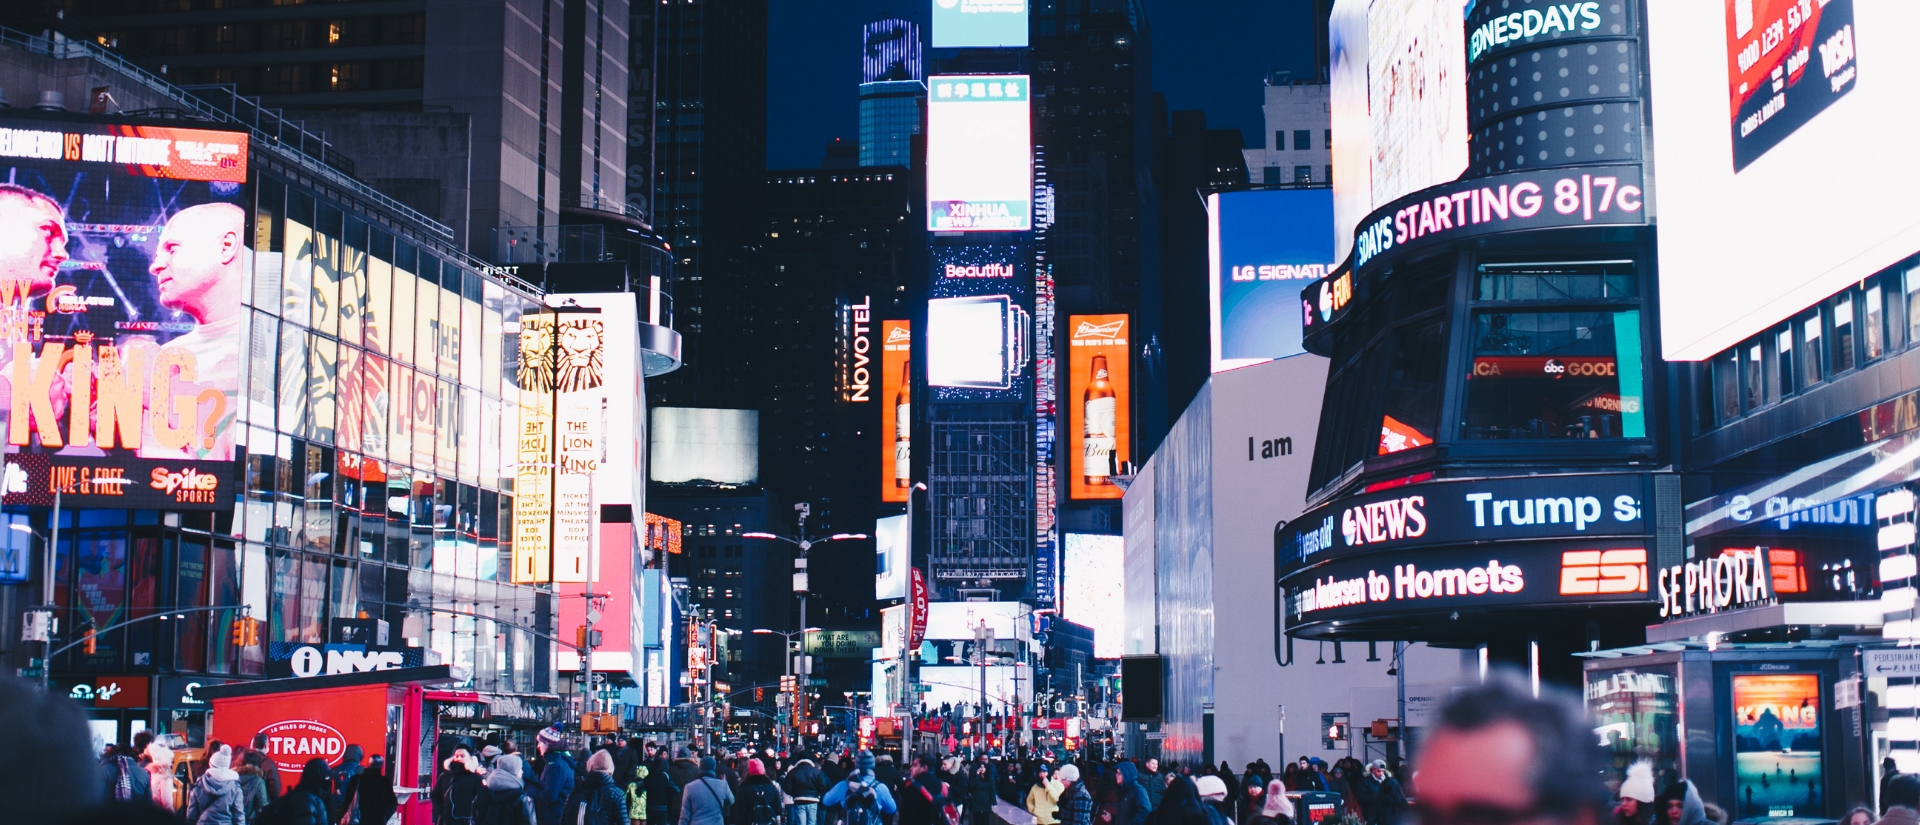 digital signage displays showing content in busy new york street